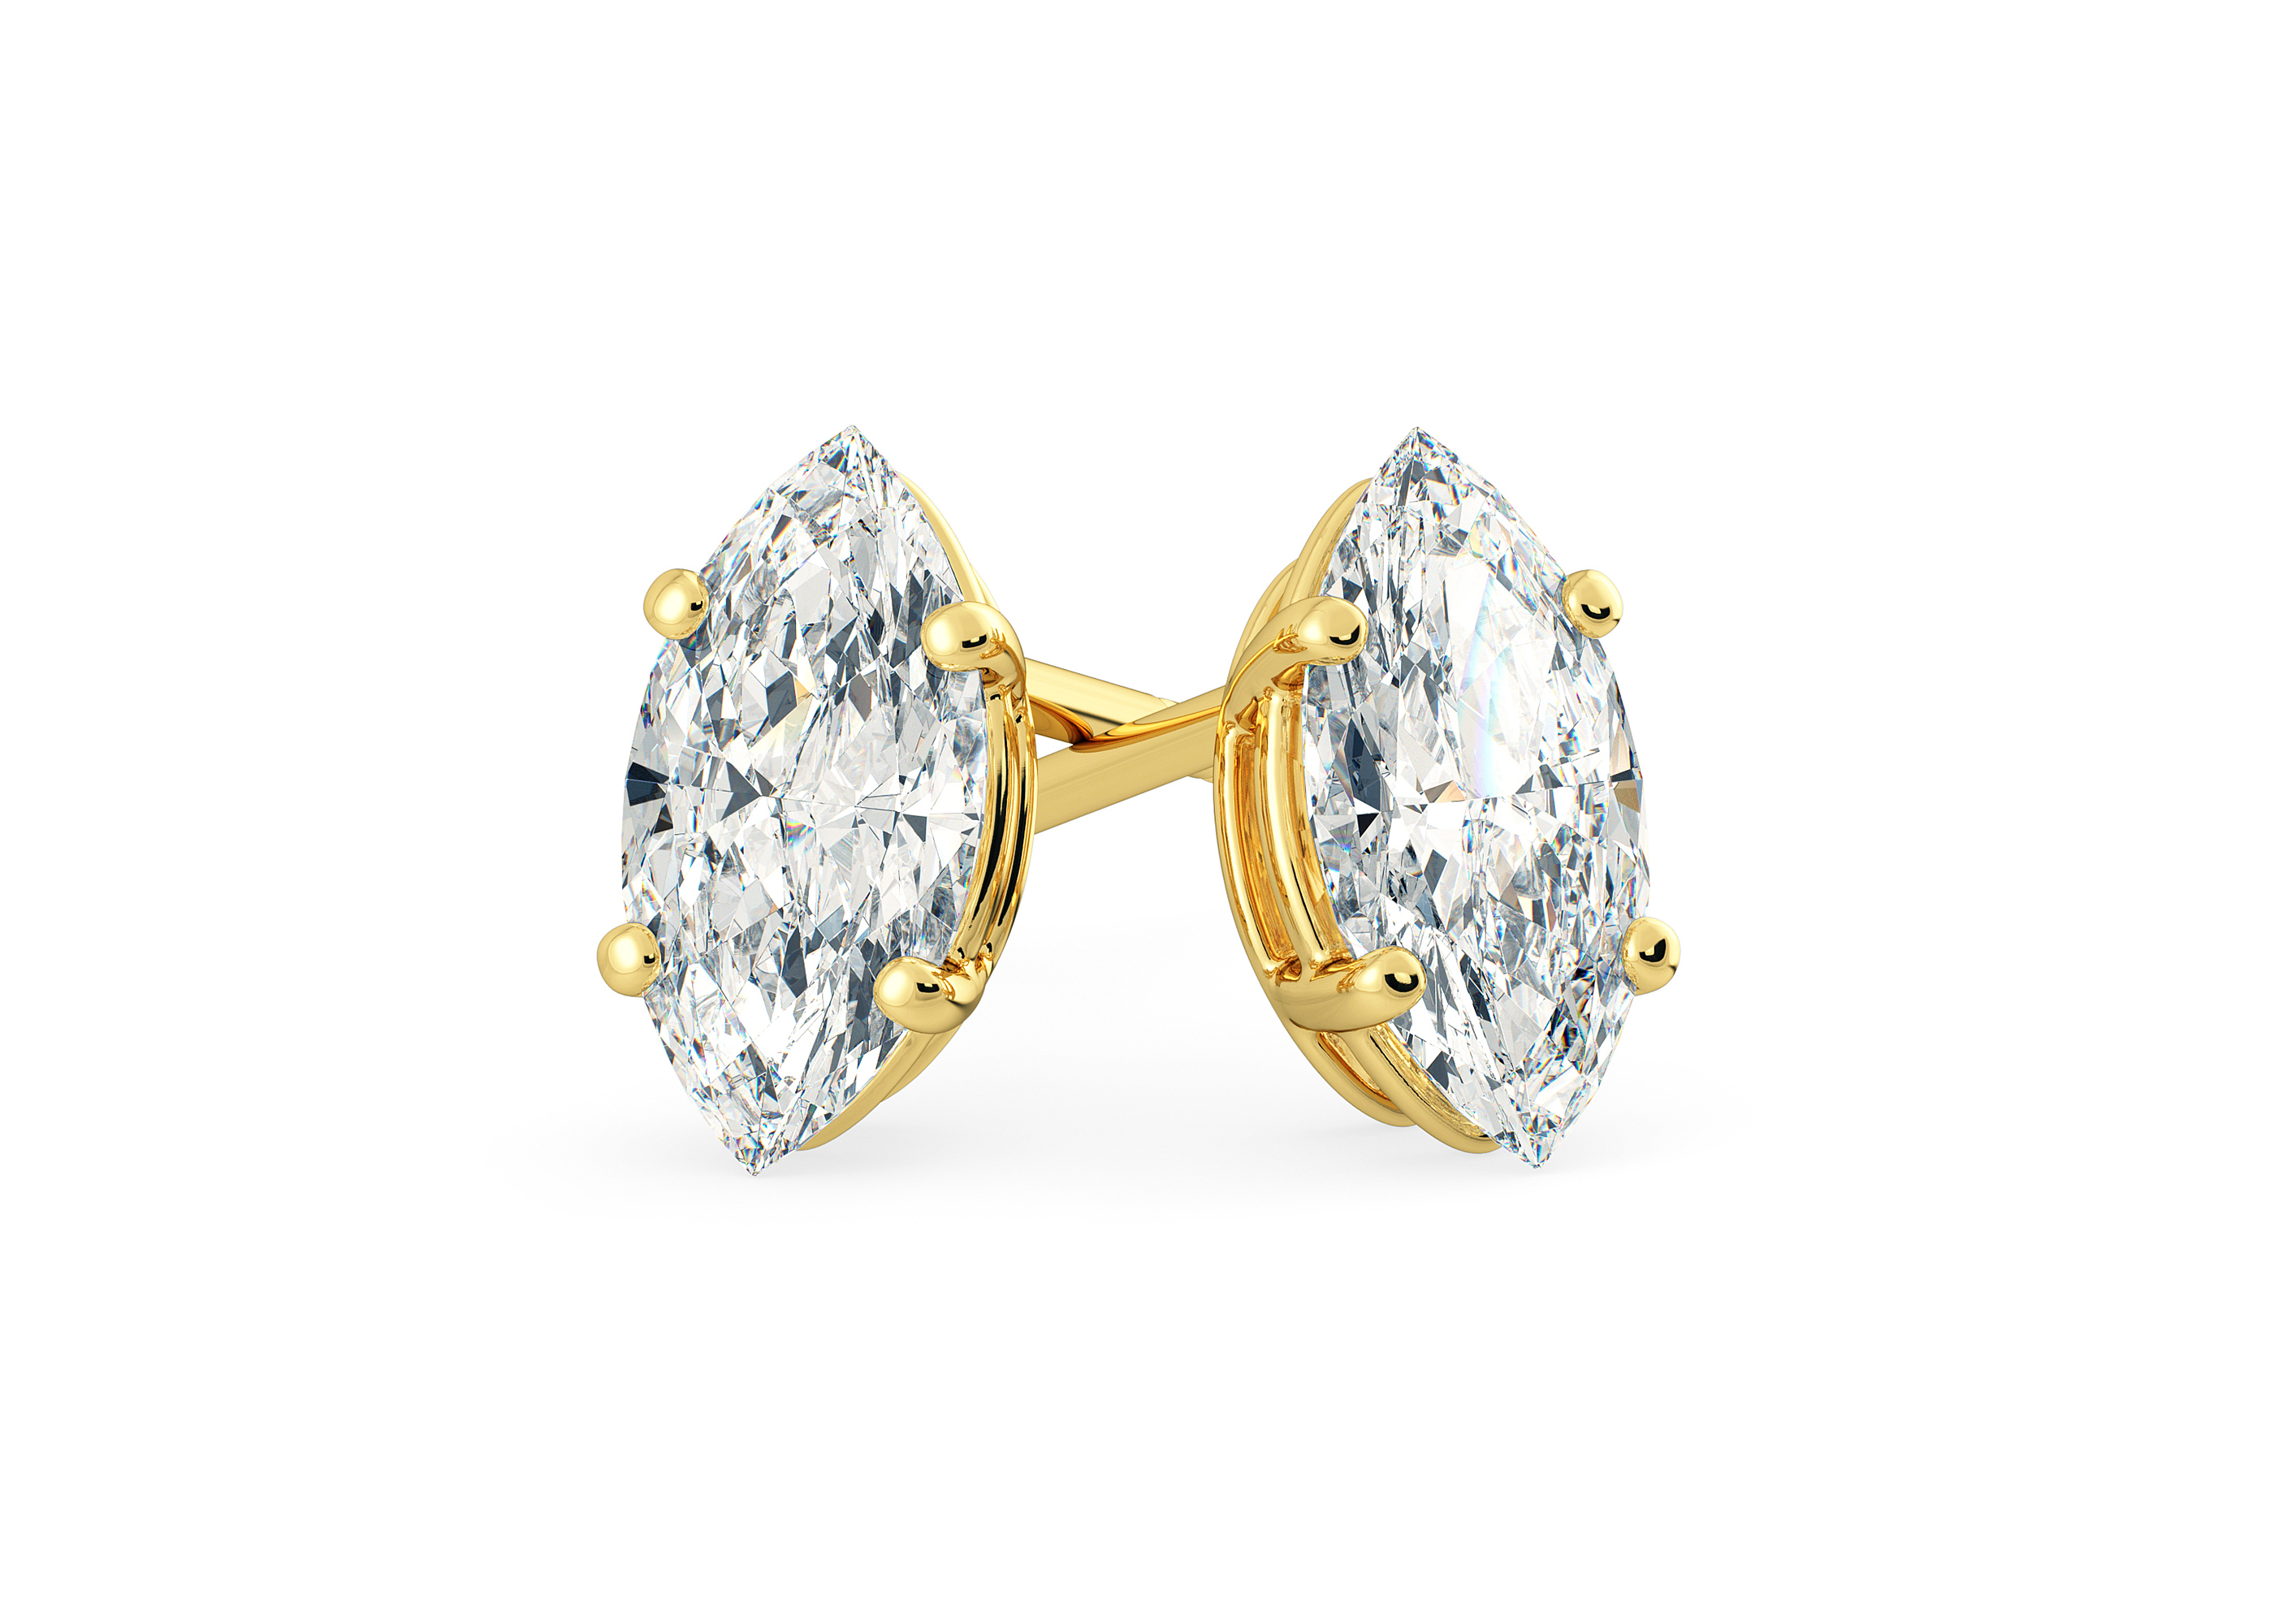 One Carat Lab Grown Marquise Diamond Stud Earrings in 18K Yellow Gold